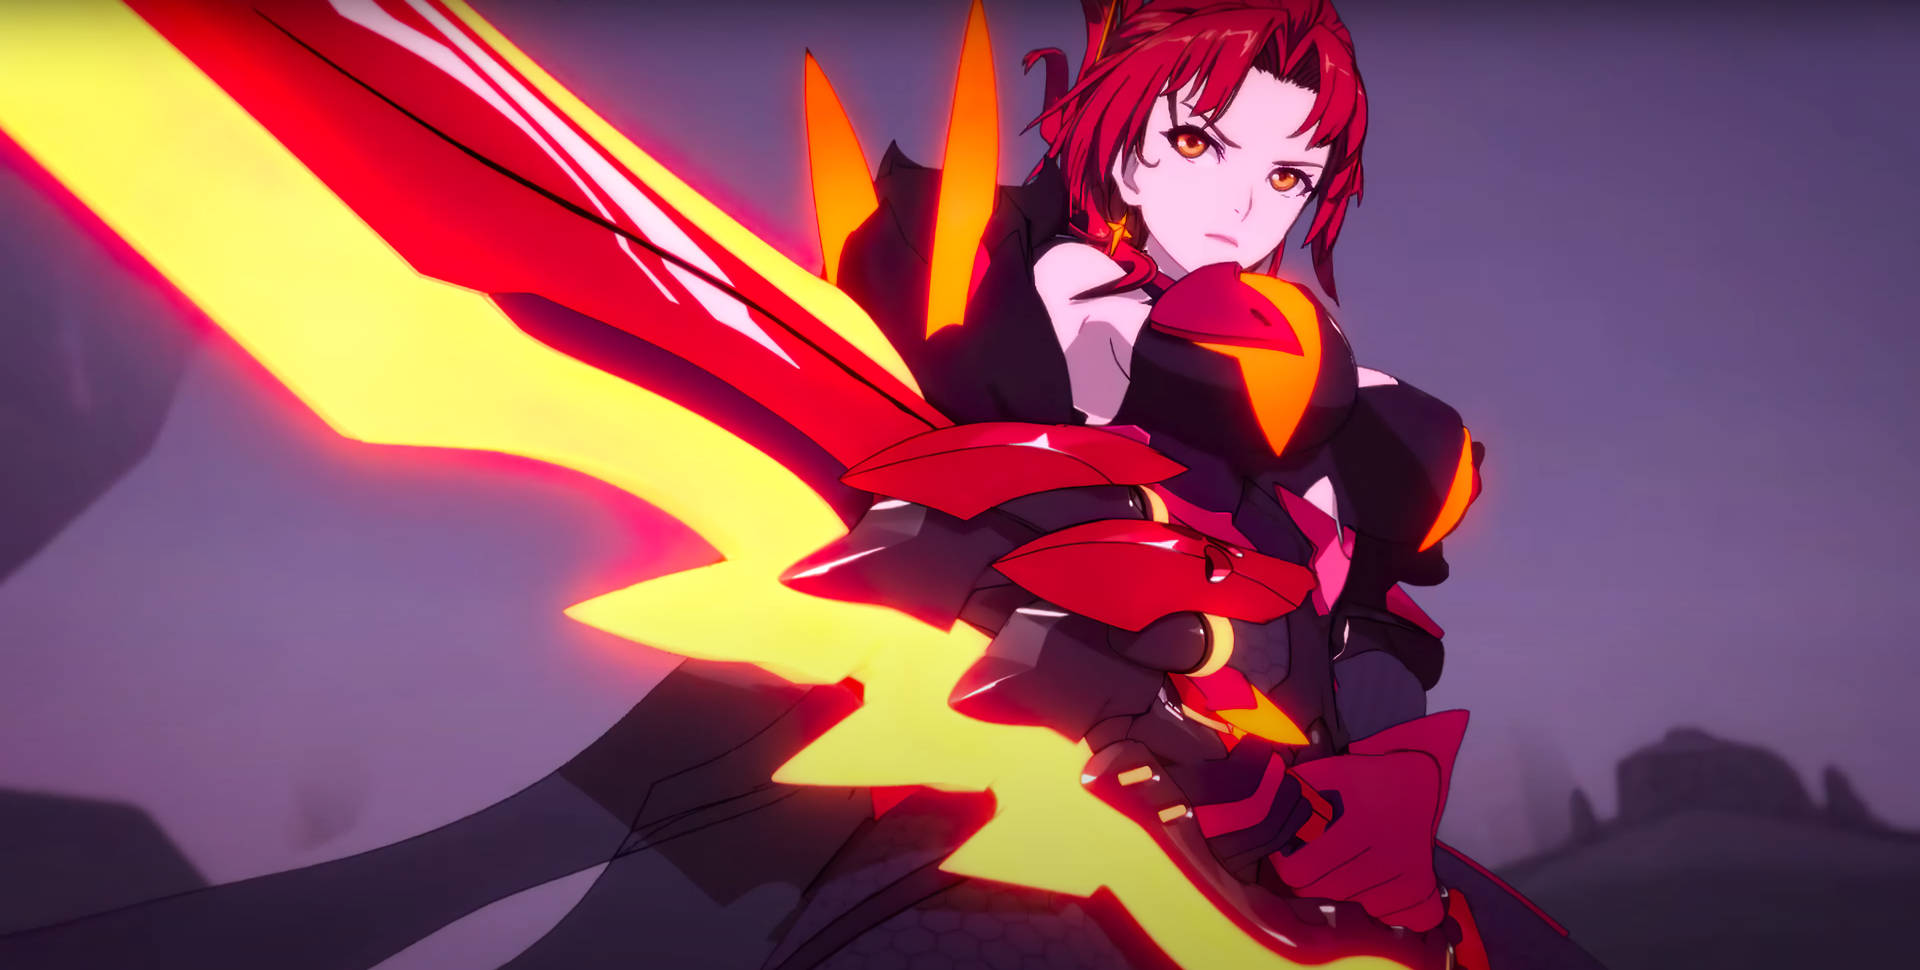 Vermillion Knight Eclipse In Action In Honkai Impact Background